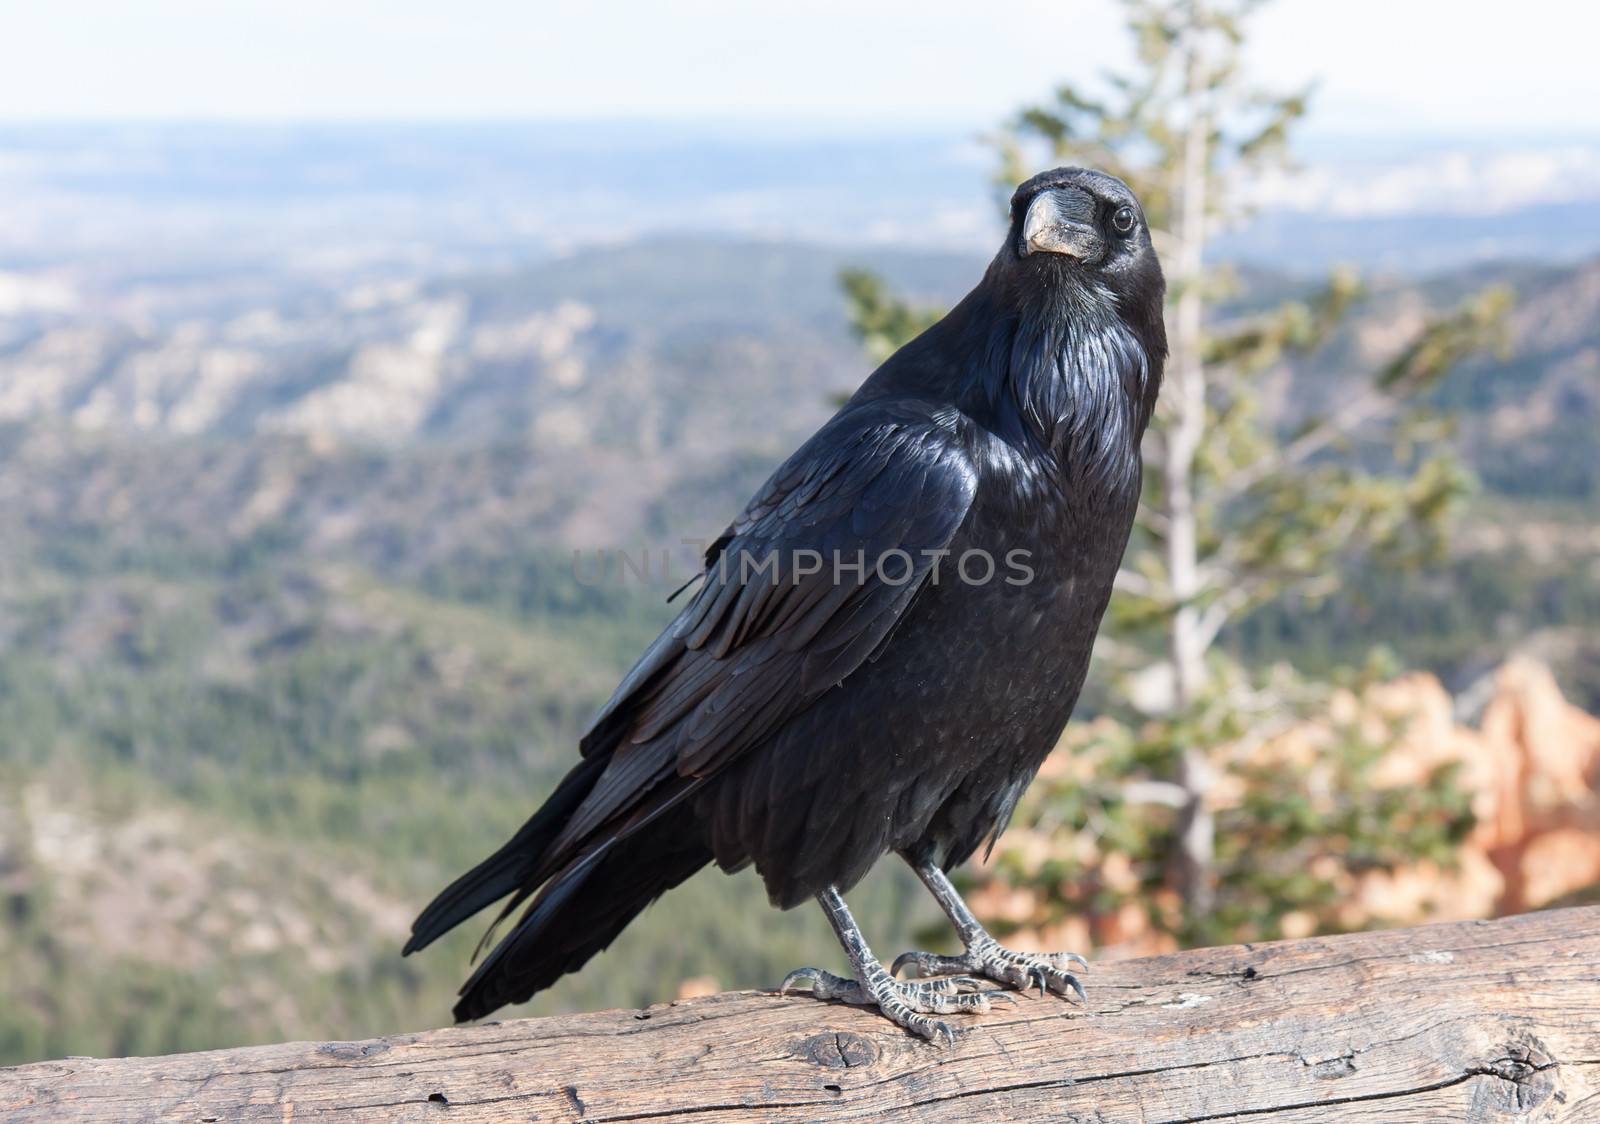 Ravens are larger than crows, with heavier bills and deeper voices. This one entertained visitors as we gazed out at the wonders of Ponderosa Point, Bryce Canyon National Park, Utah.